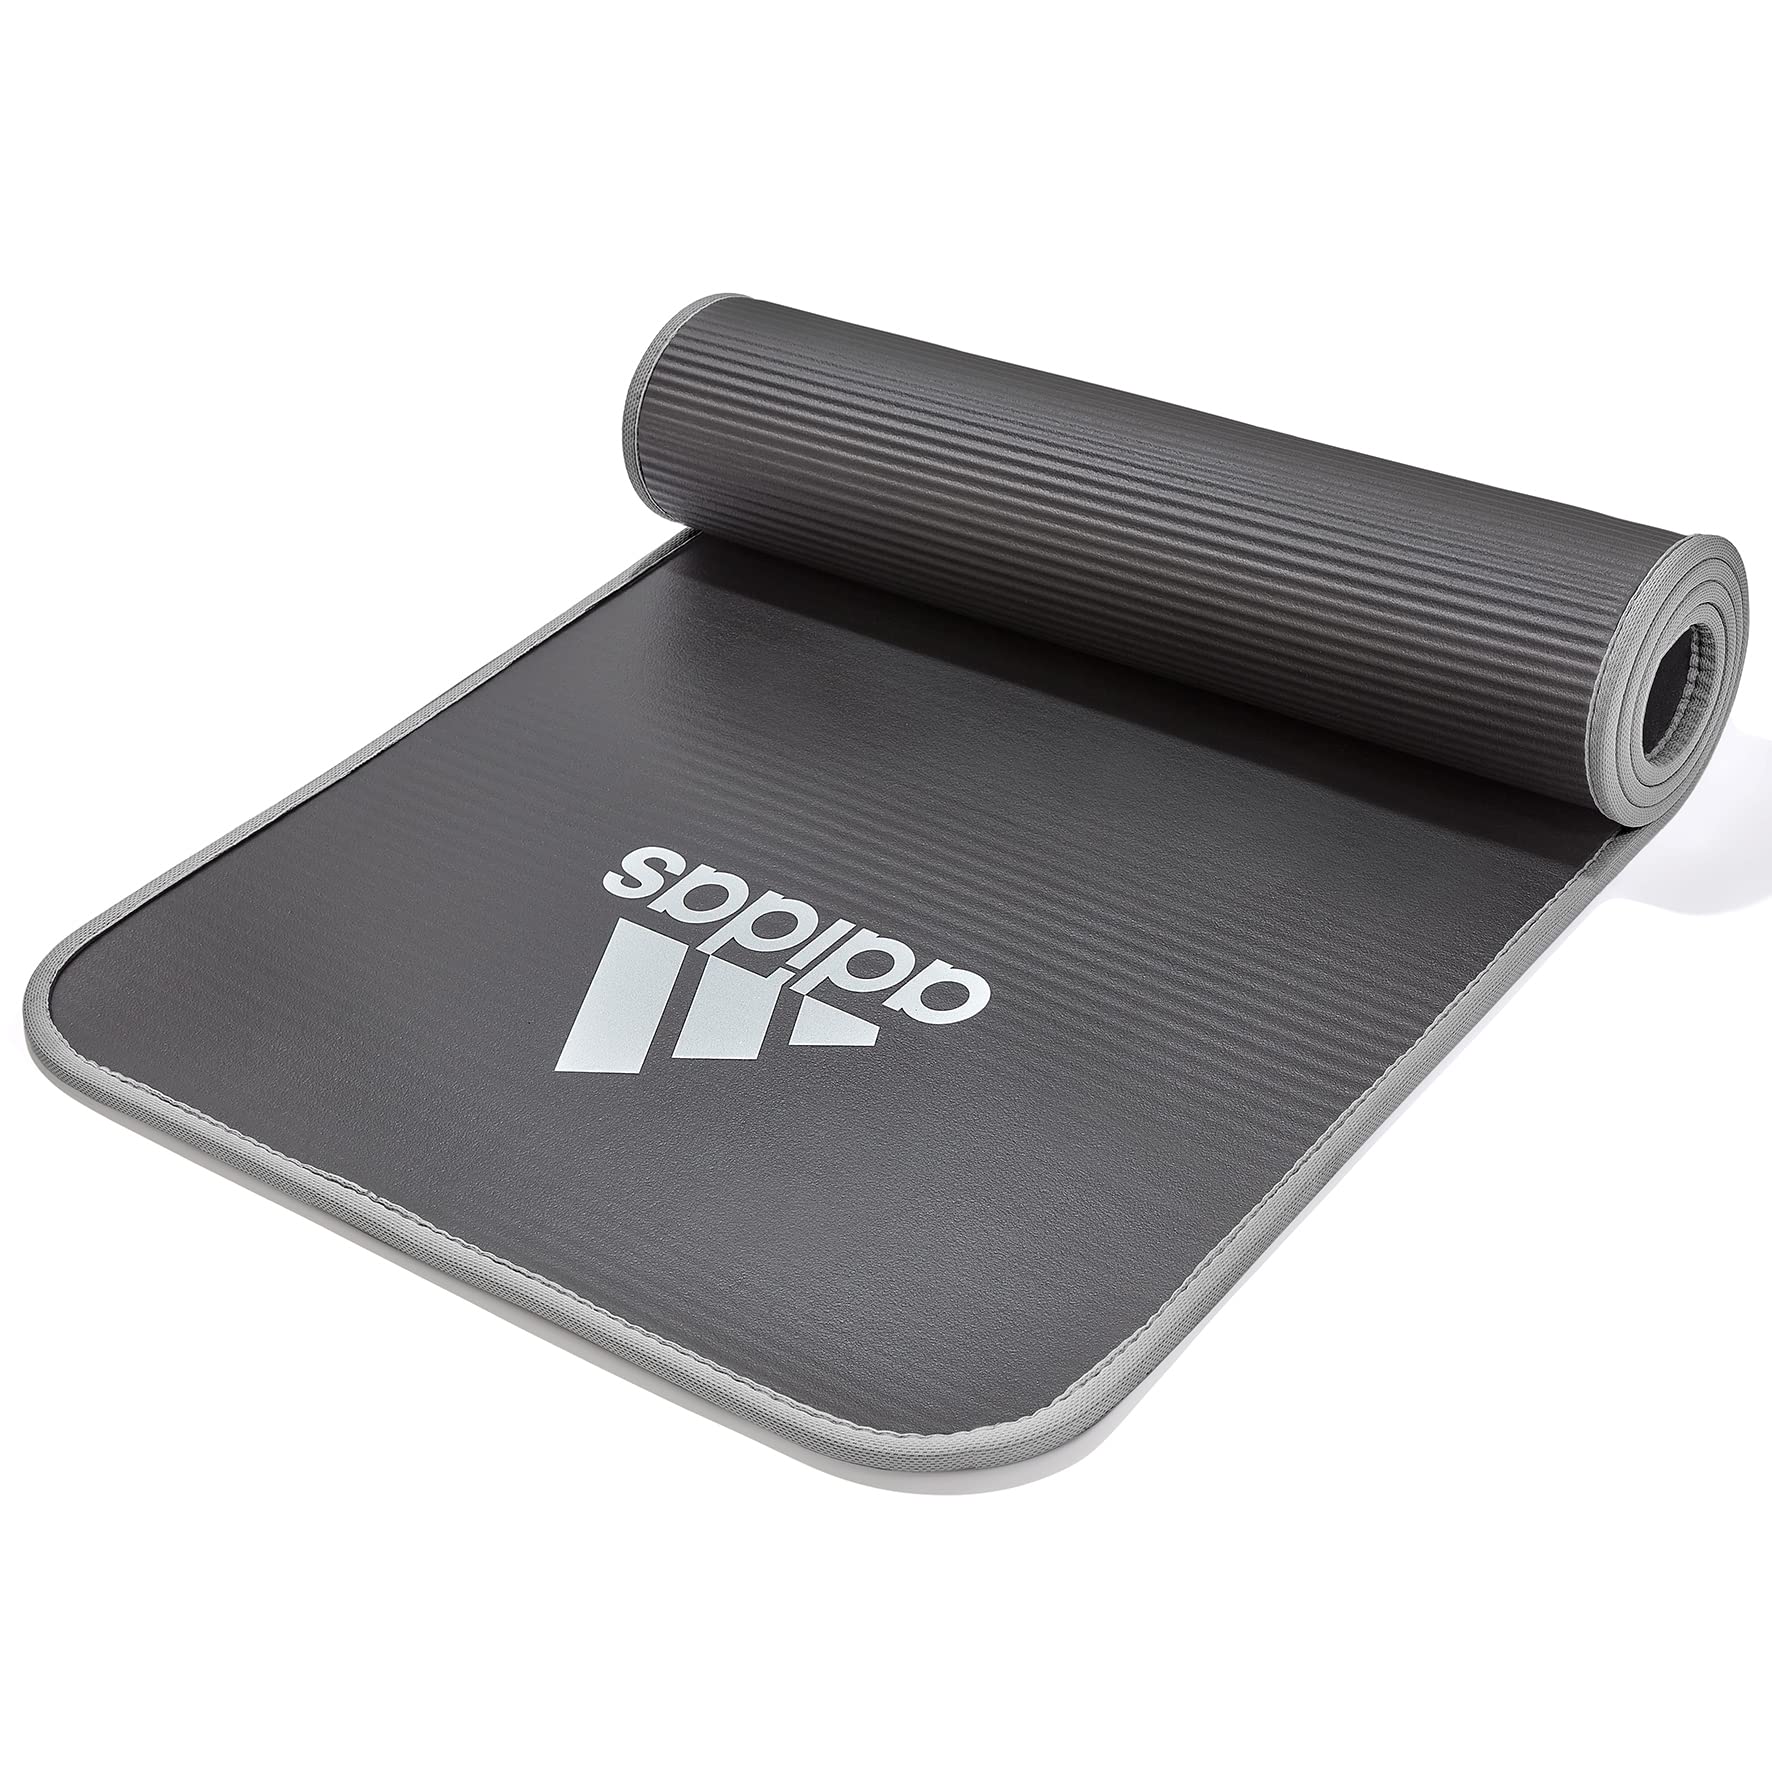 adidas 10mm Extra Thick Training Mat with Carrying Strap and Non-Slip Textured Base - Cushioned Workout Mat for Home Gym, Floor Workouts, and Intense Exercises - Portable and Durable - Grey